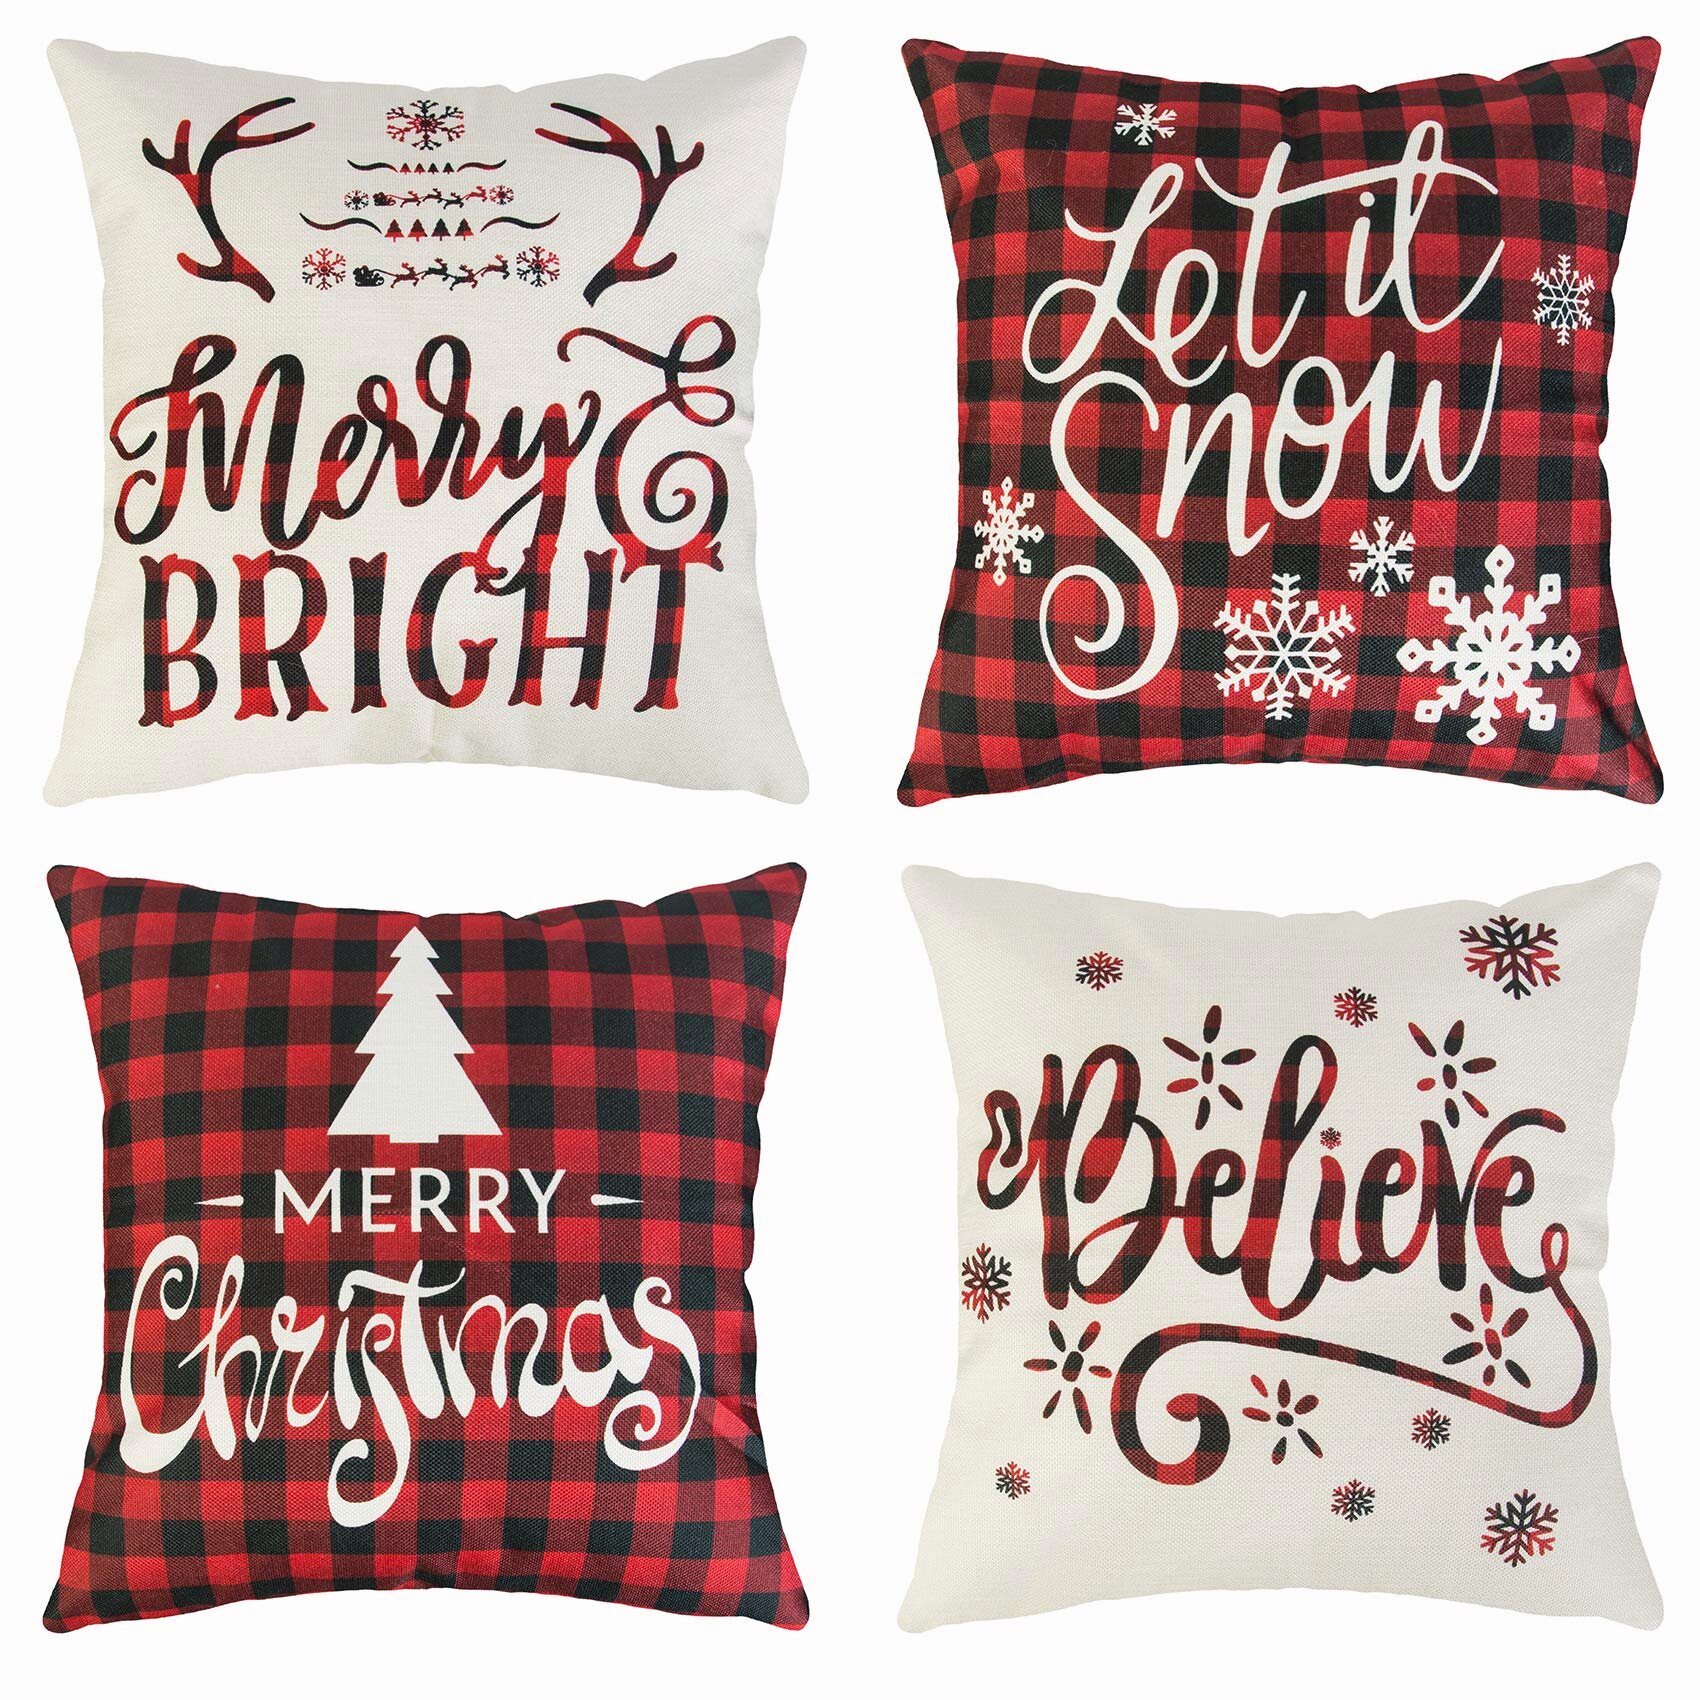 Asamour Vintage Xmas Quotes with Snowflake Cotton Linen Throw Pillow Case Home Decorative Cushion Cover for Sofa Couch Bedding 18x18 Inches Baby It’s Cold Outside A 